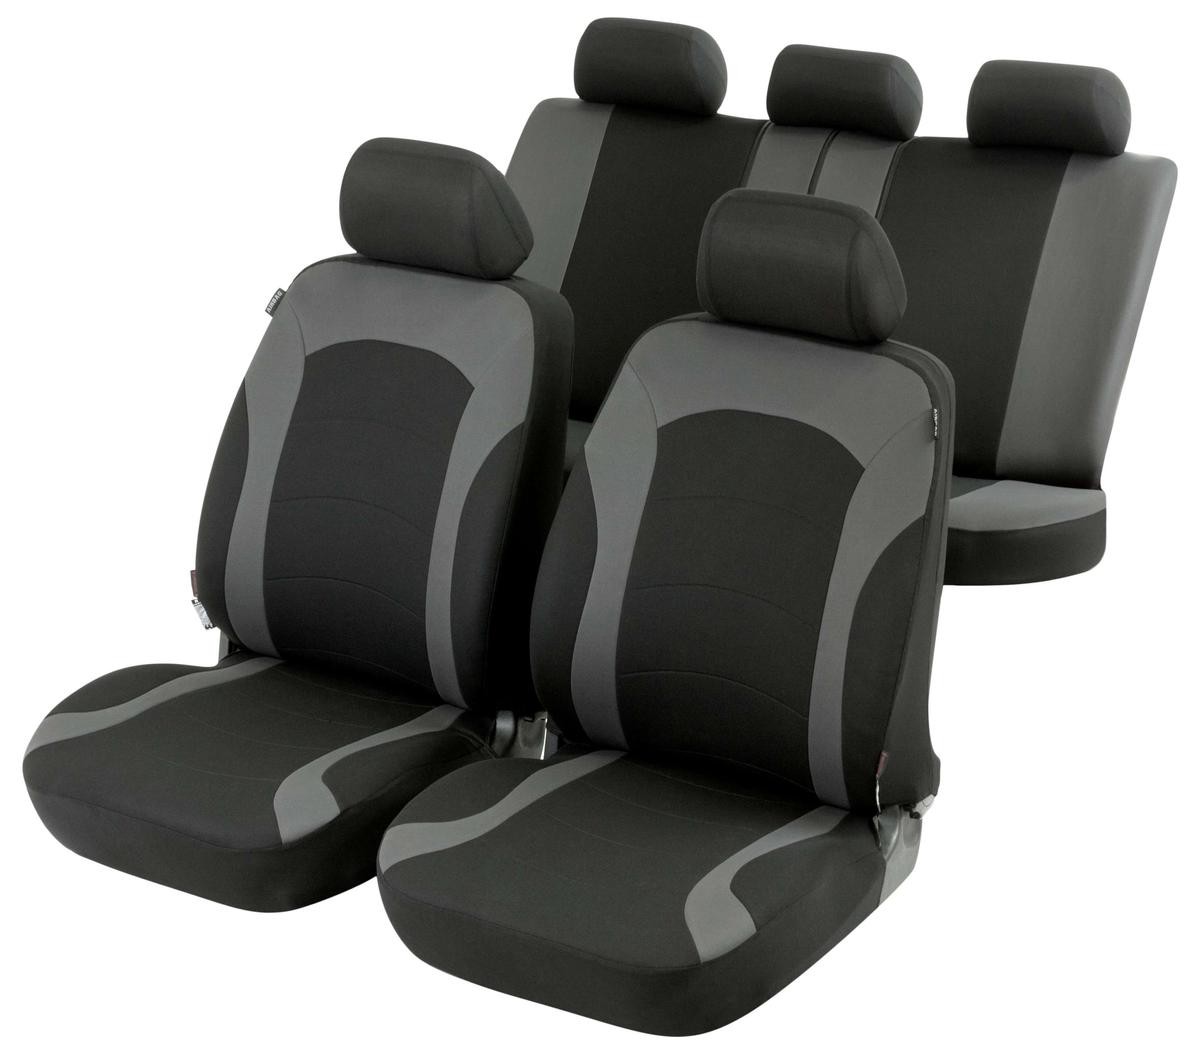 WALSER 11786 Auto seat covers VW Jetta 3 (1K2) black/grey, Polyester, Front and Rear